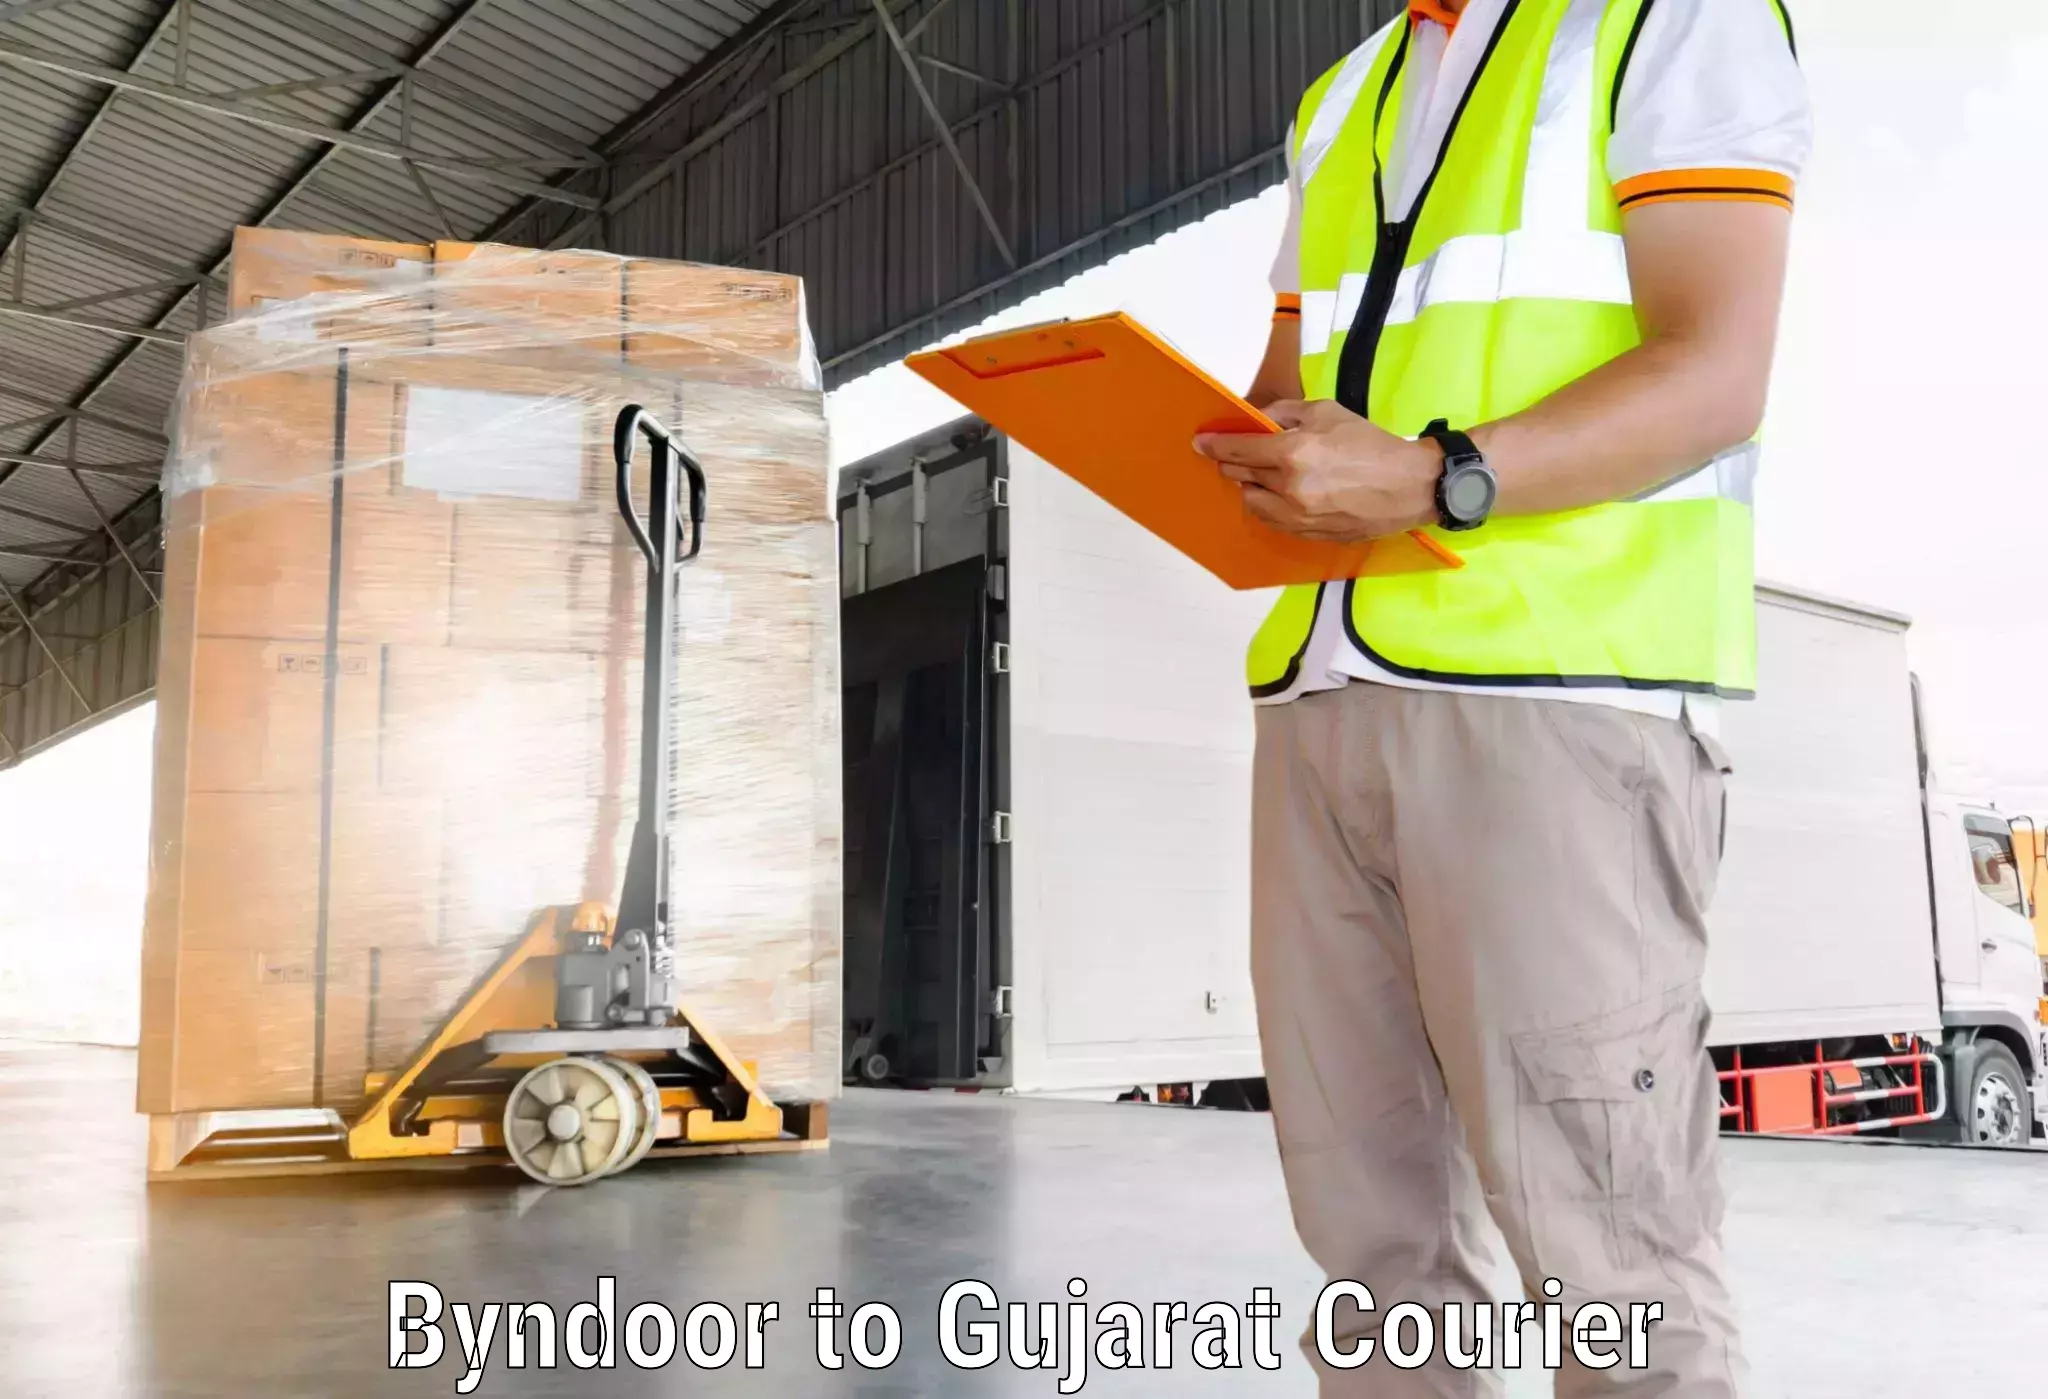 Global shipping solutions Byndoor to Dhasa